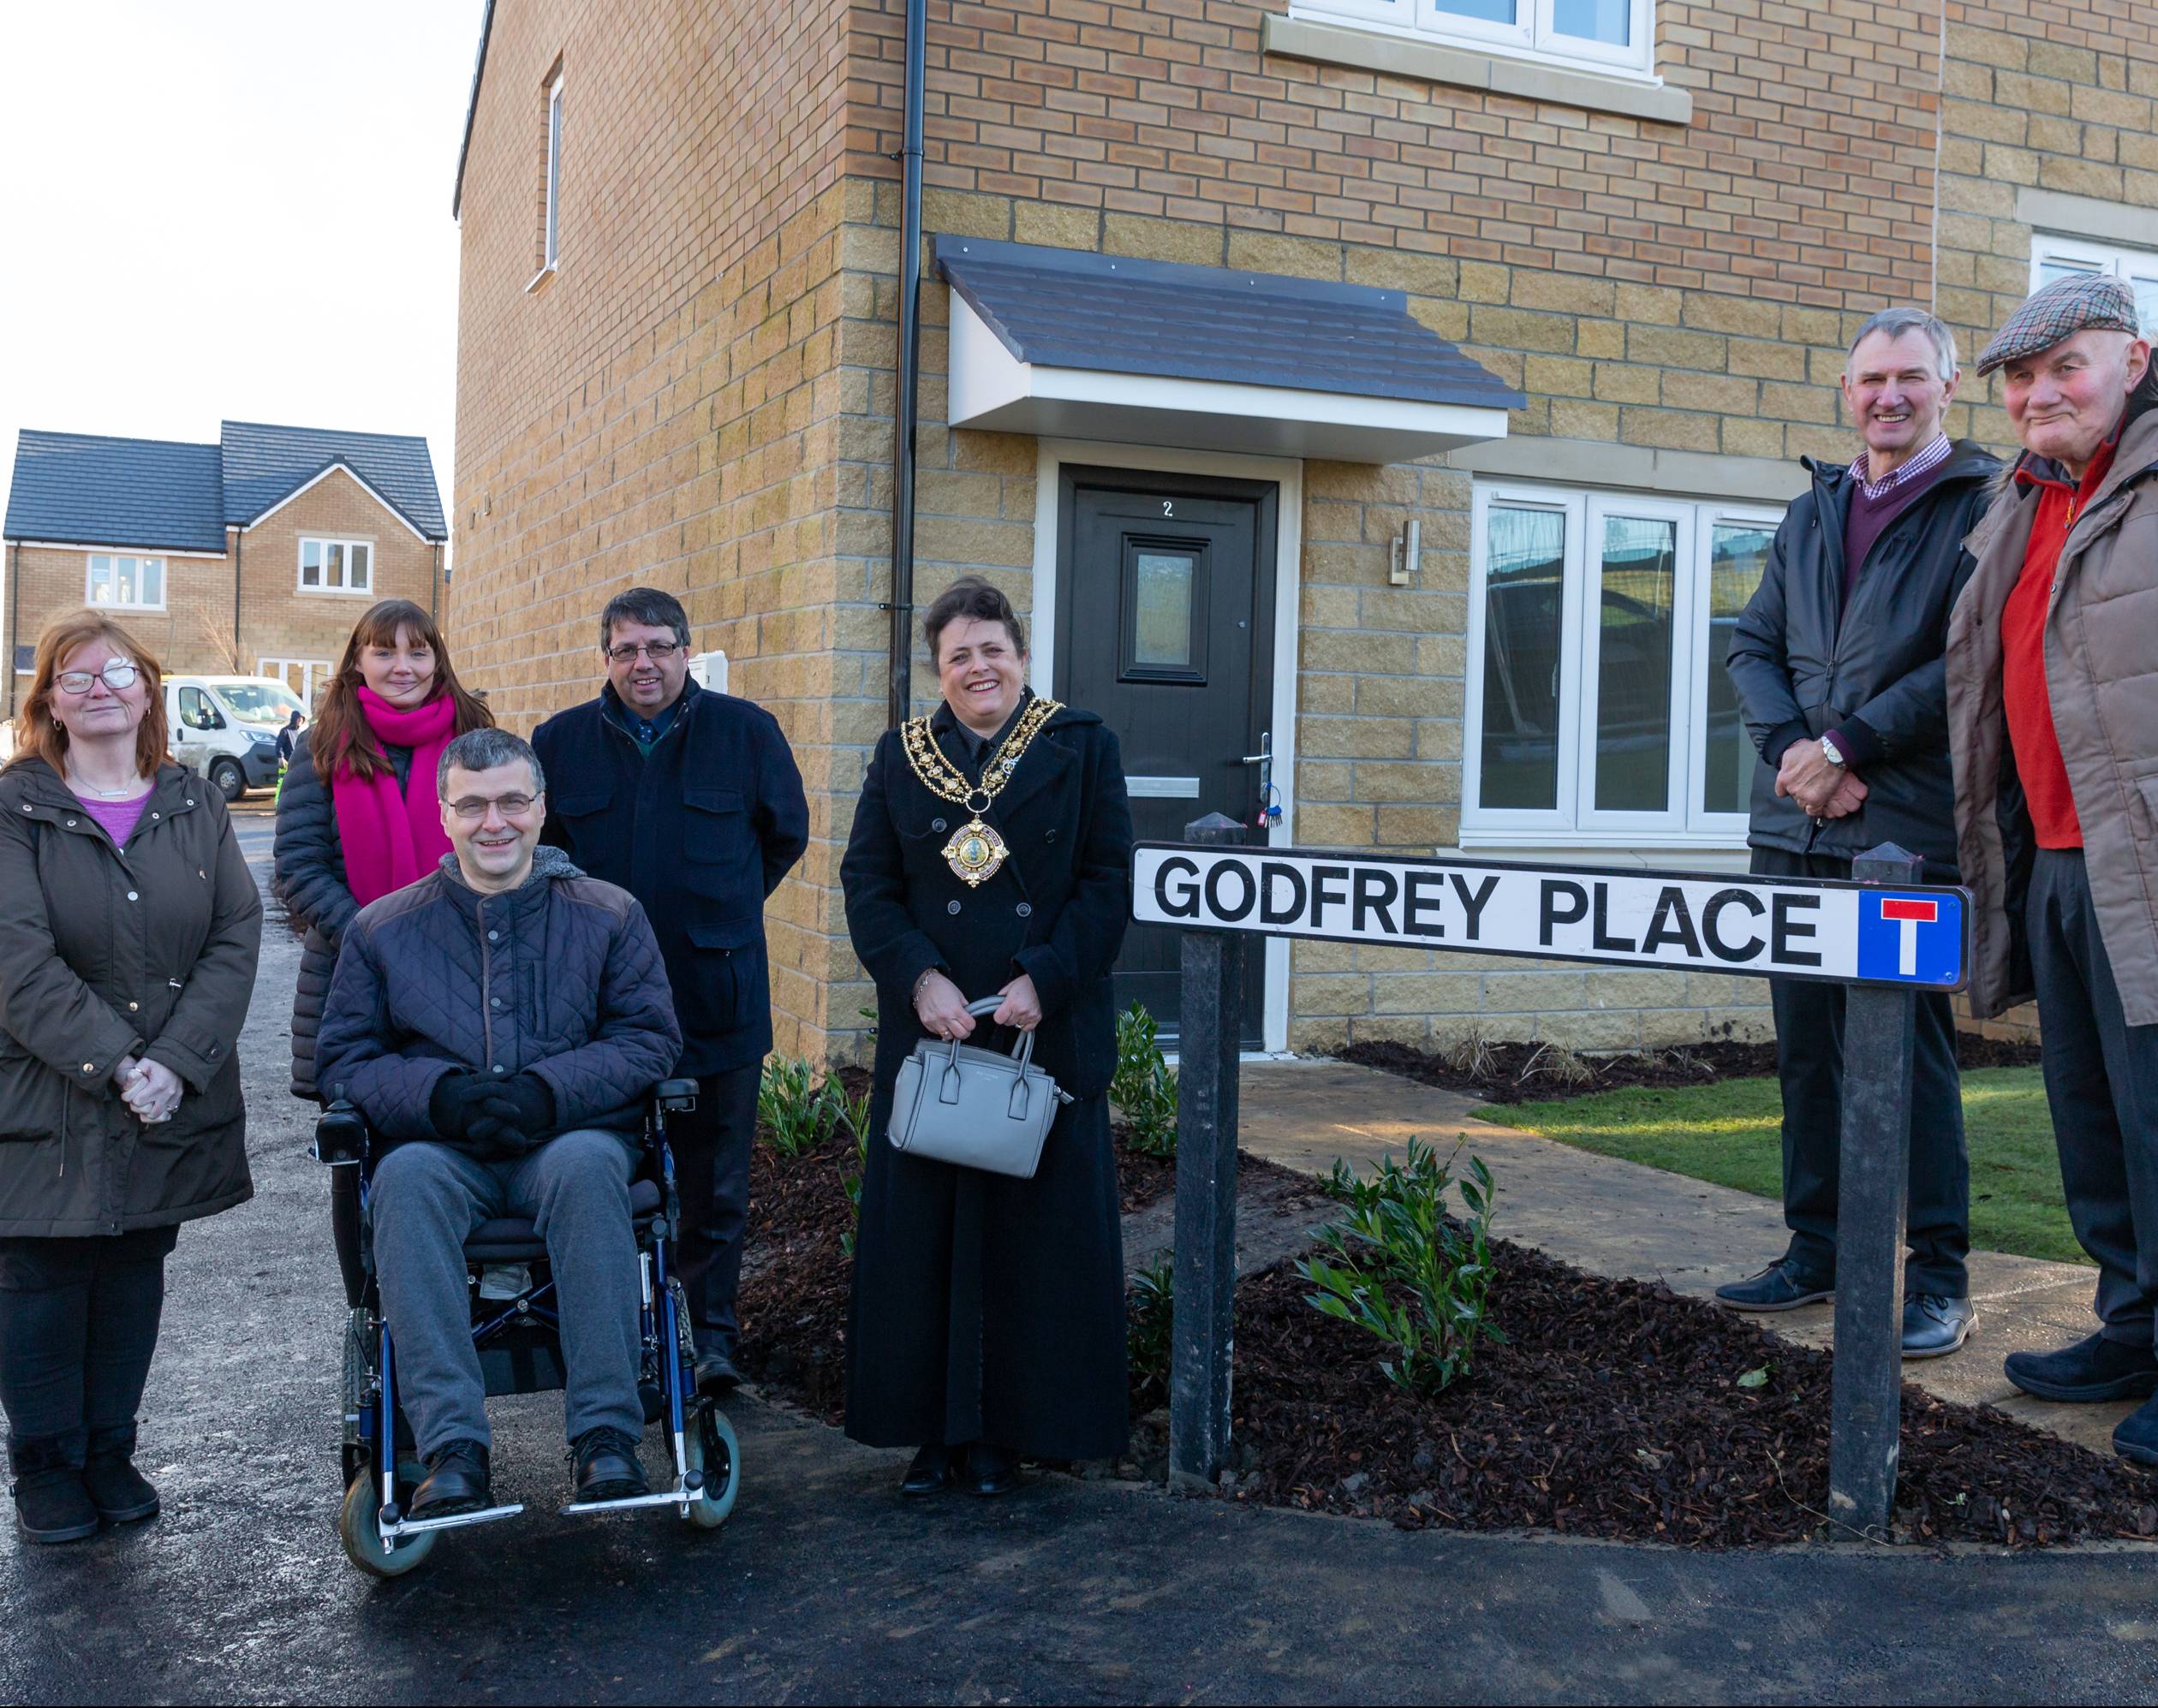 The official opening of Godfrey Place